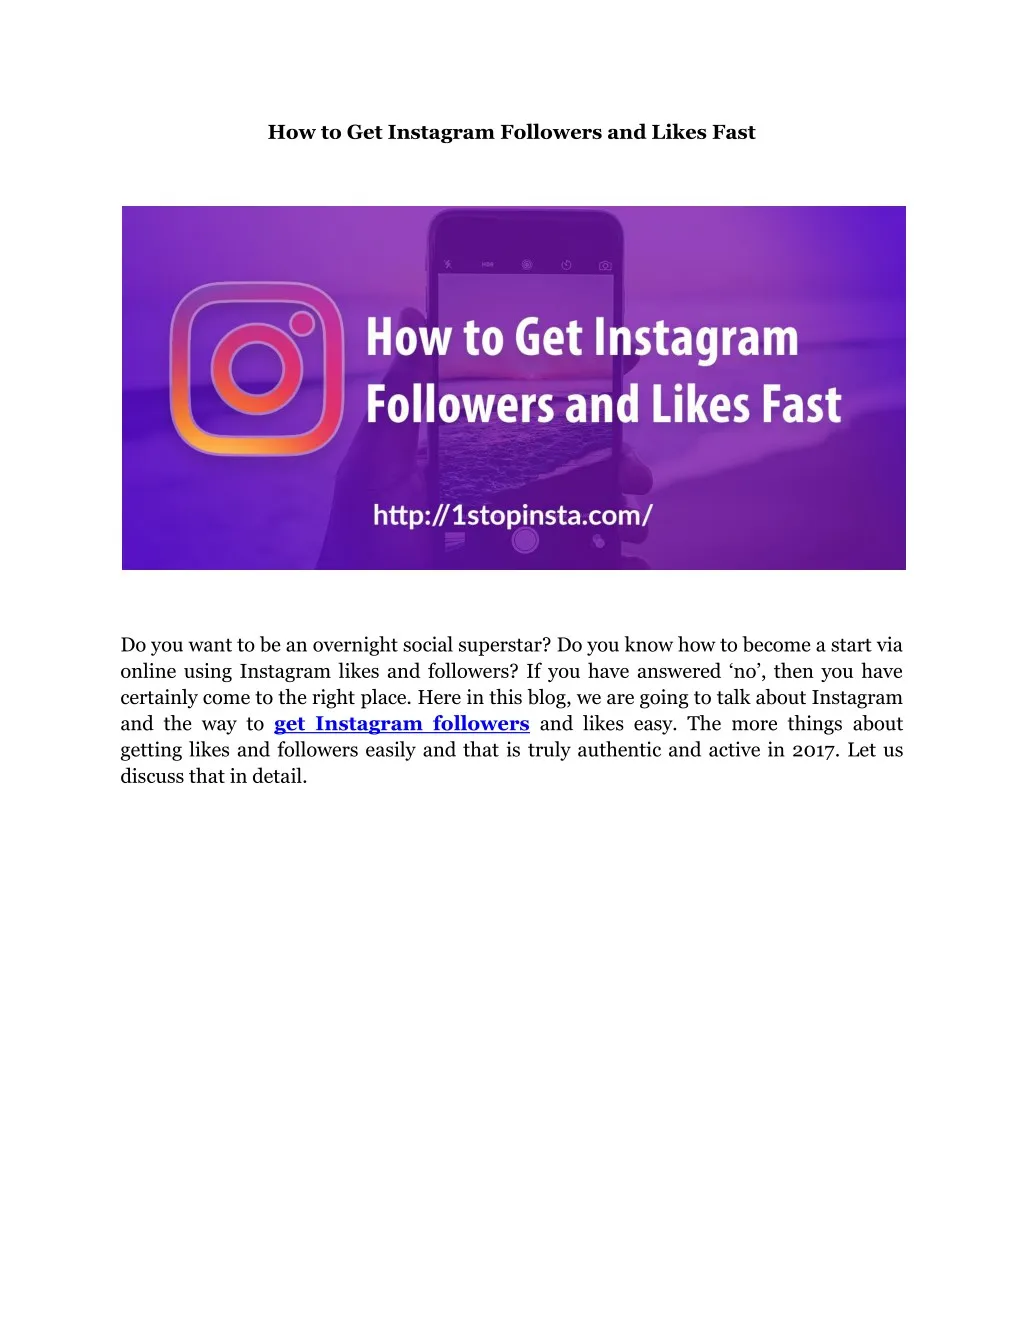 how to get instagram followers and likes fast